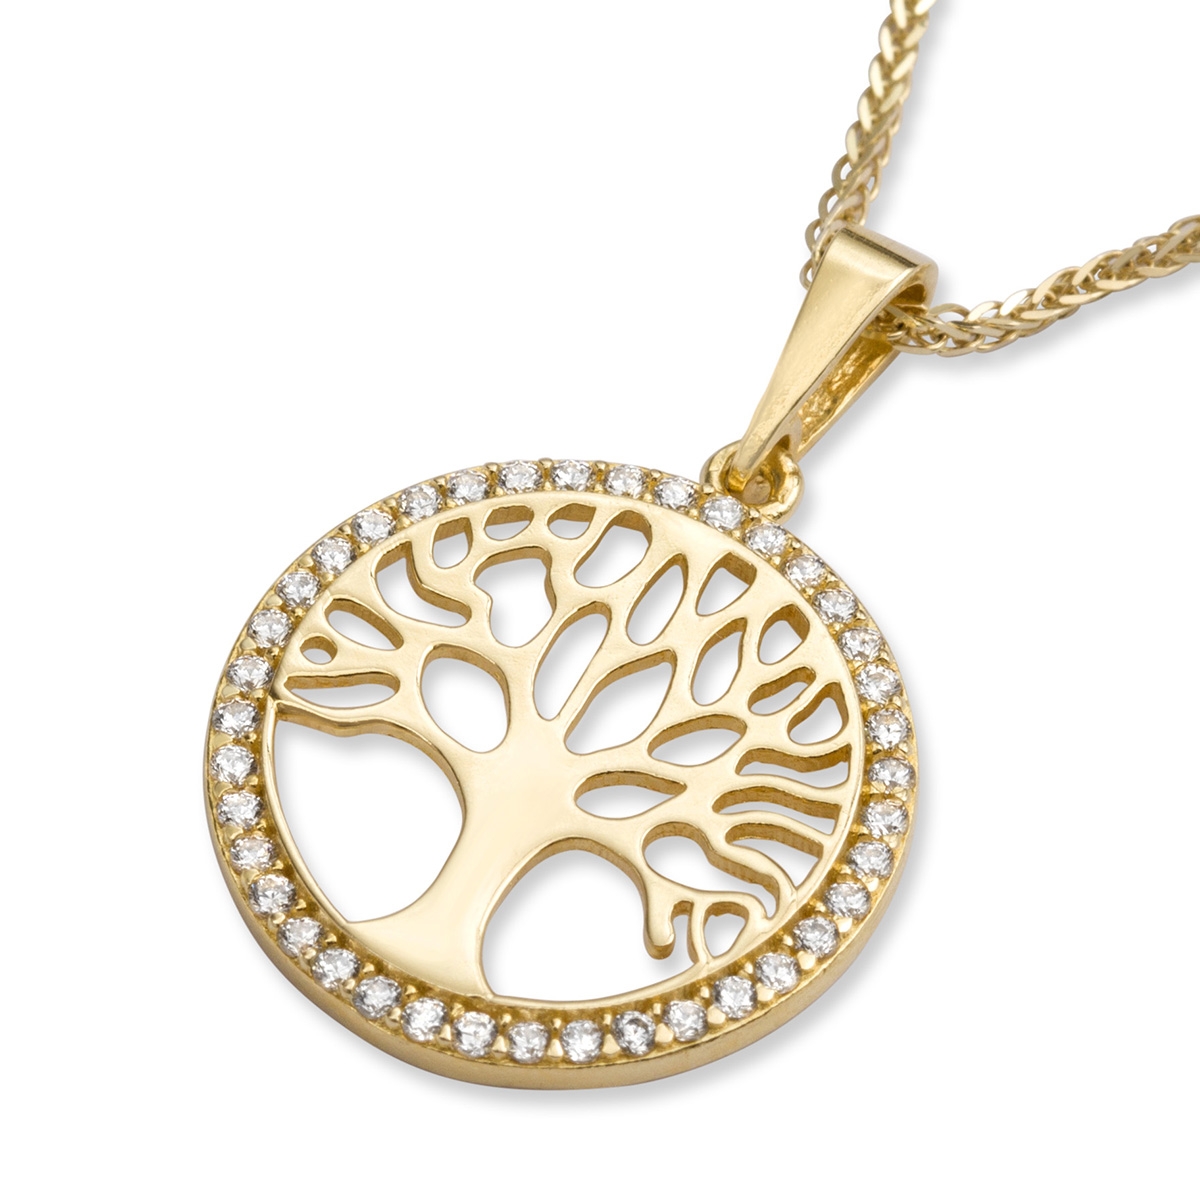 14K Yellow Gold and Cubic Zirconia Round Tree of Life Pendant Necklace - 1